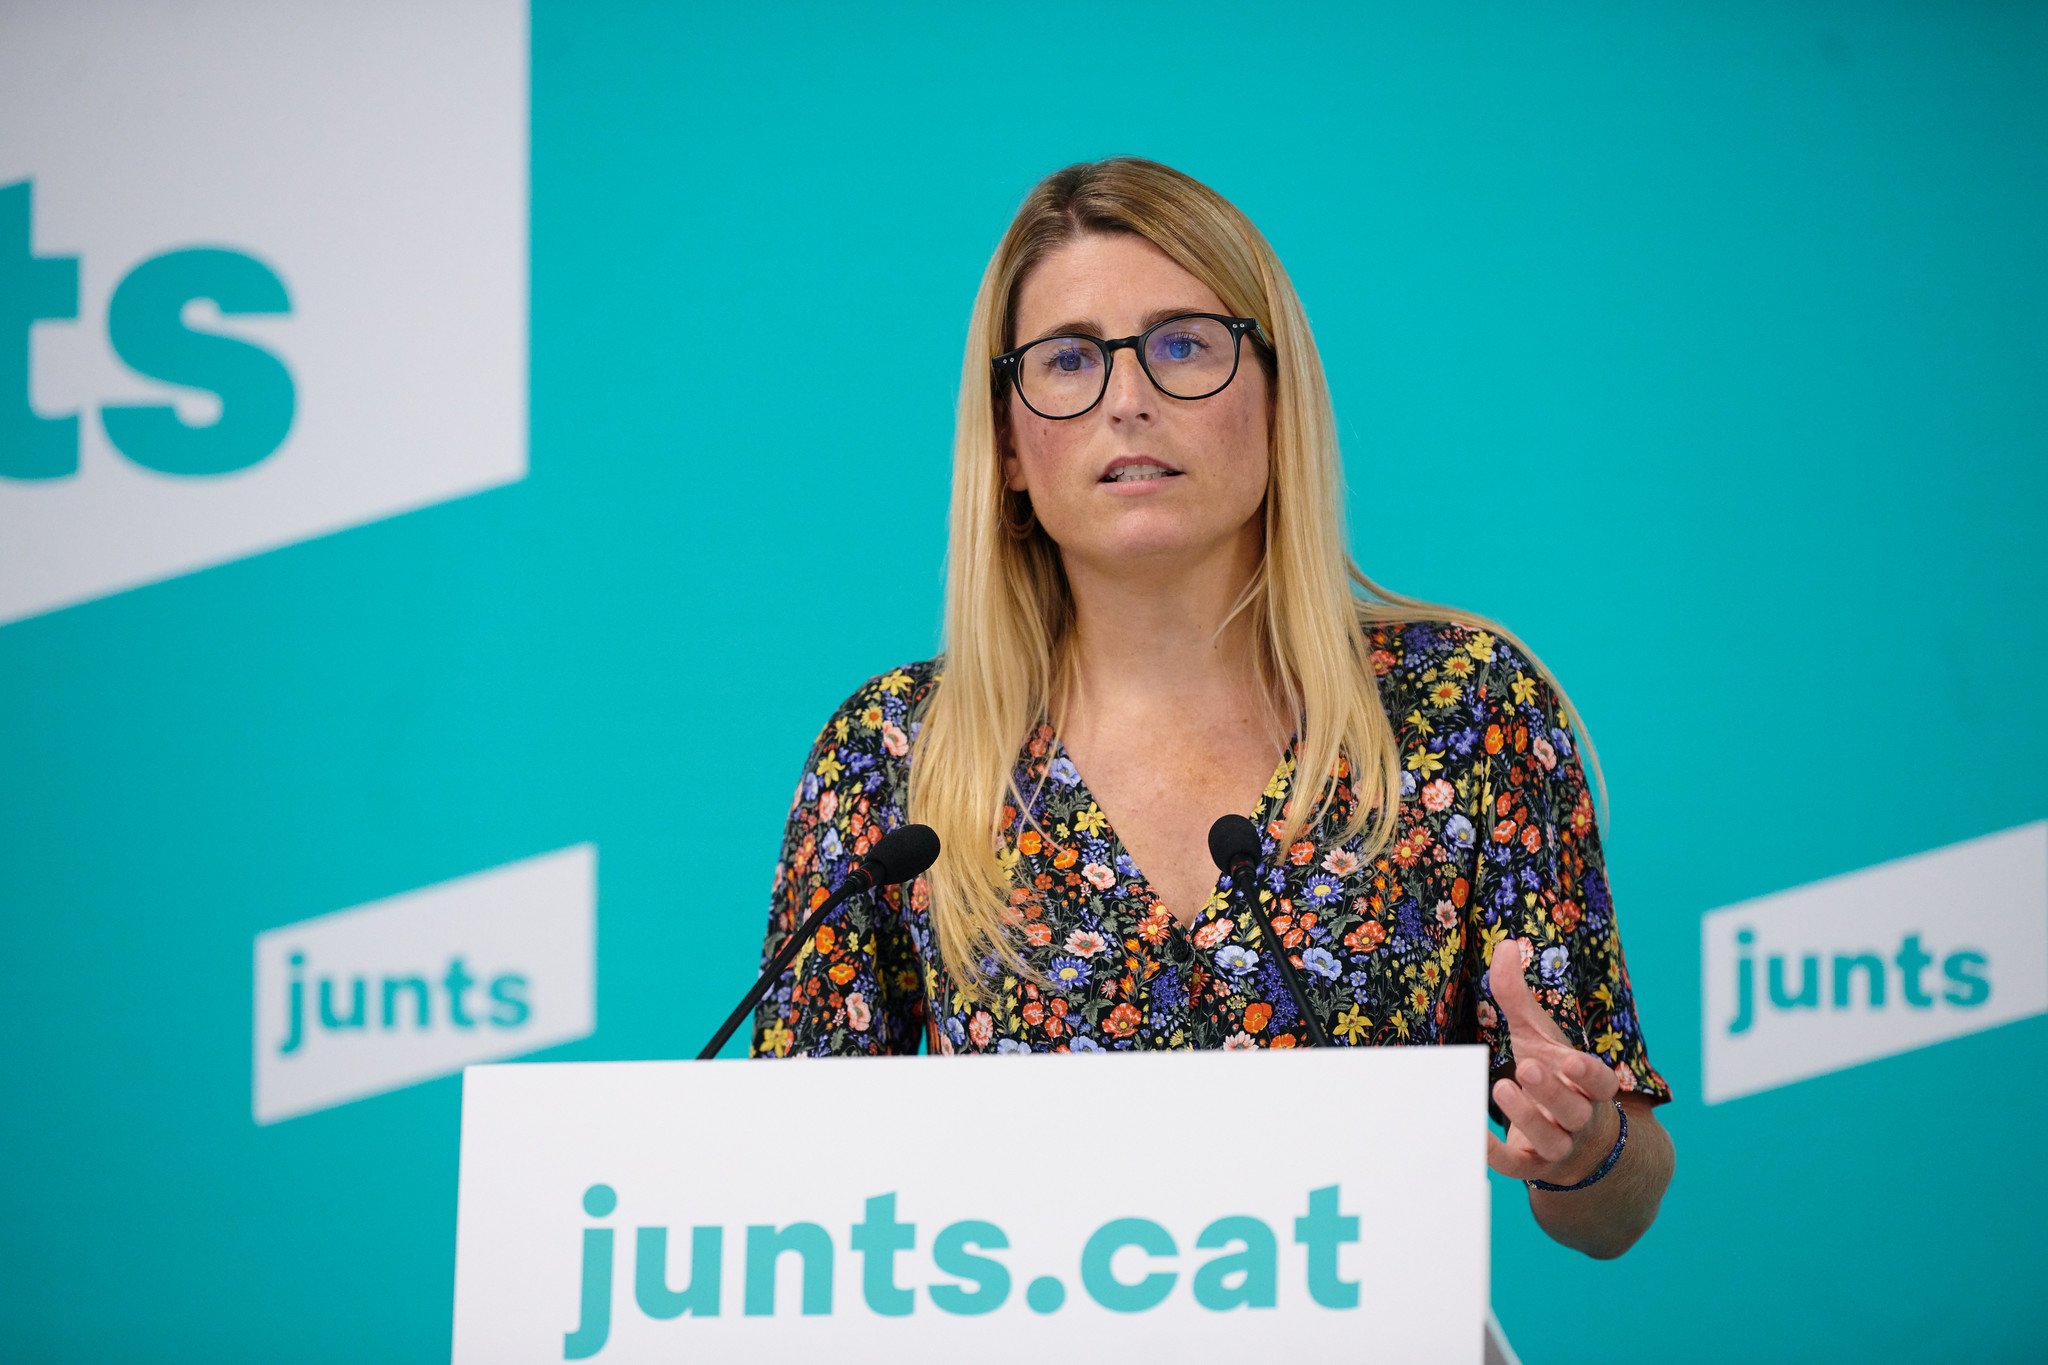 Junts calls on ERC for unity, both in dialogue and leveraging their votes in Madrid